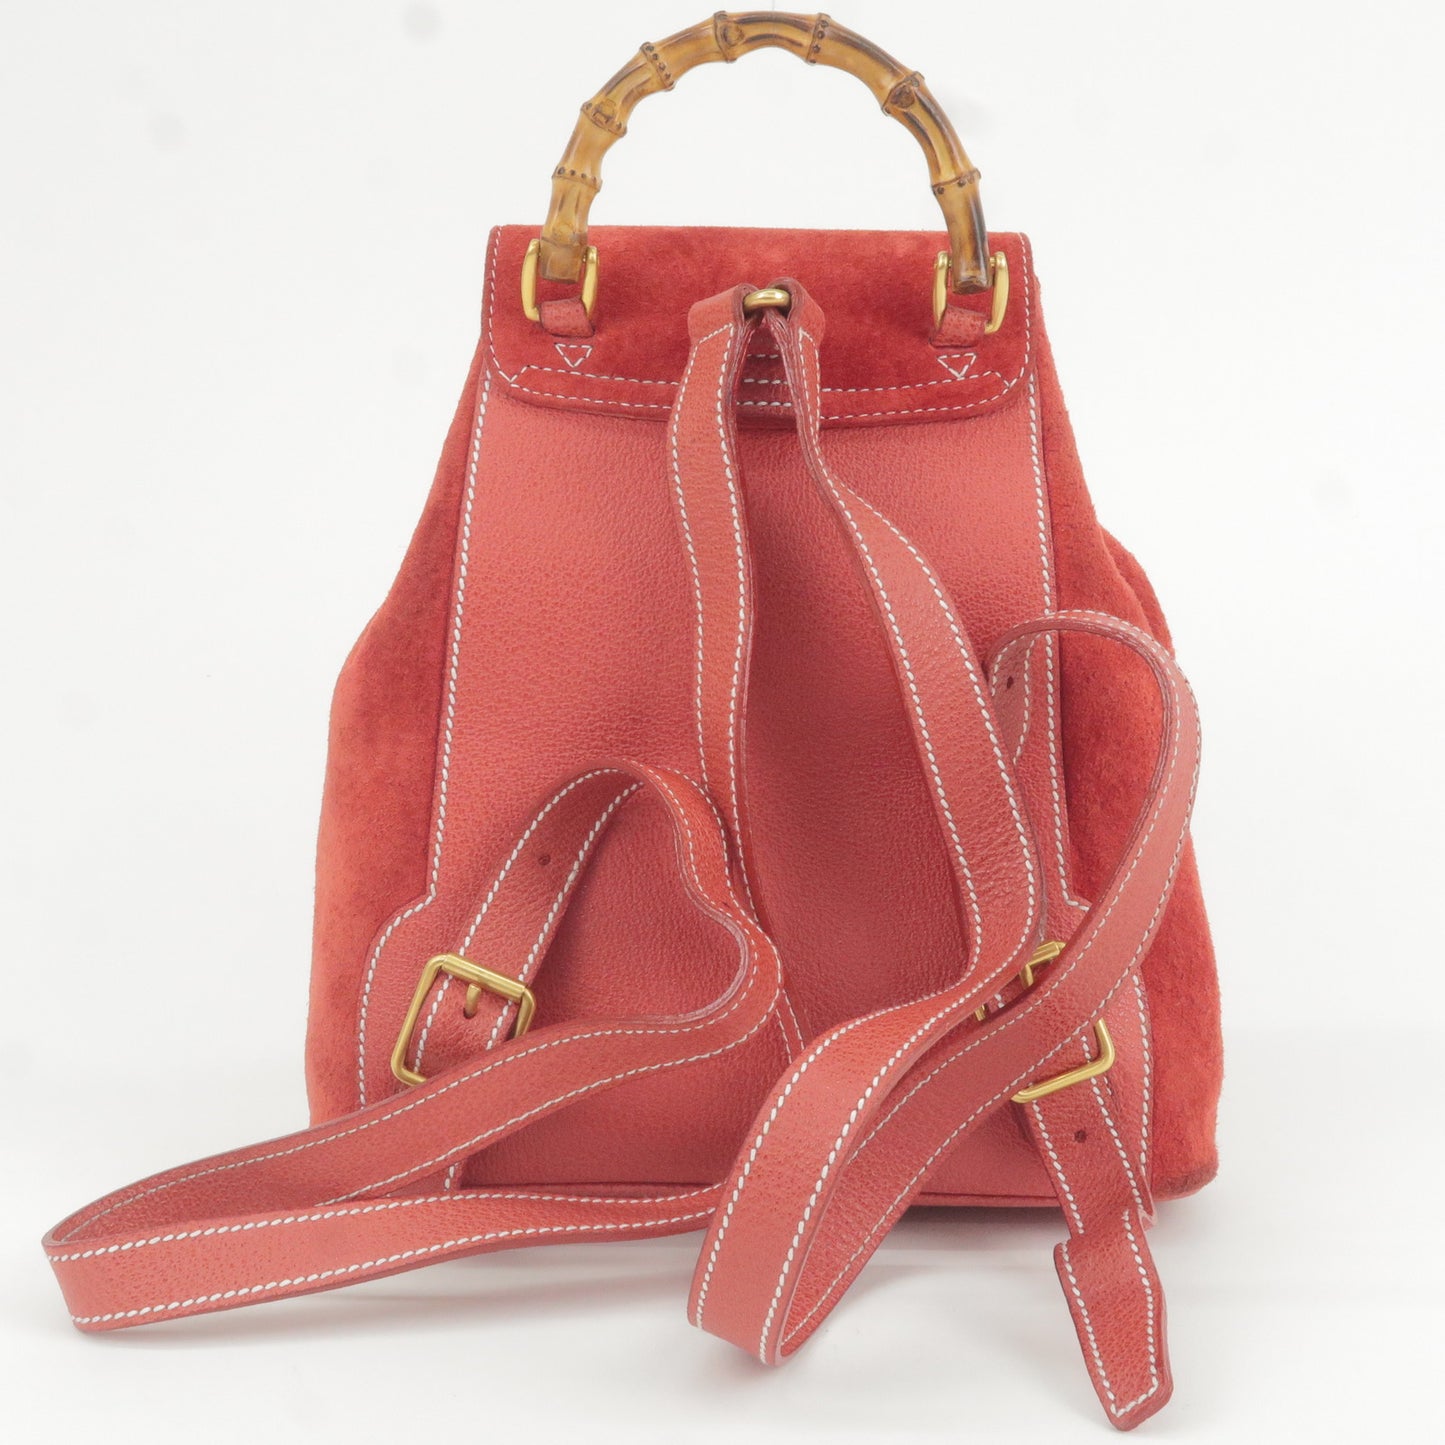 GUCCI Bamboo Suede Leather Ruck Sack Back Pack Red 003.1705.0030